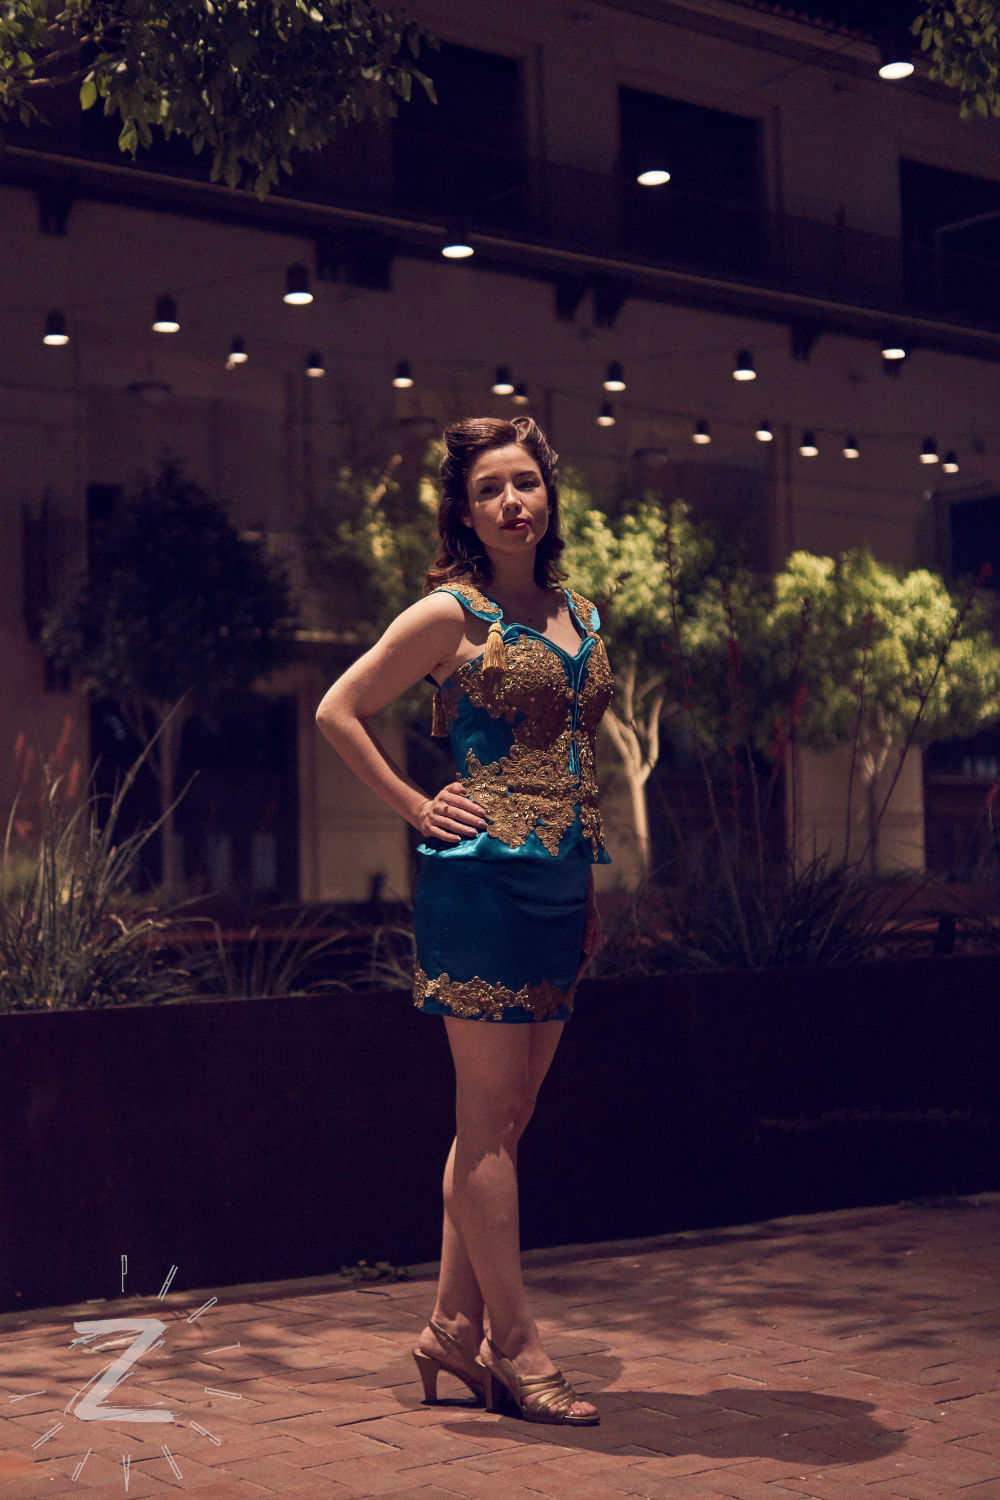 Album cover photo for the teal dress with golden embroidery inspired by Tom Lea's title cover for 'The Brave Bulls'